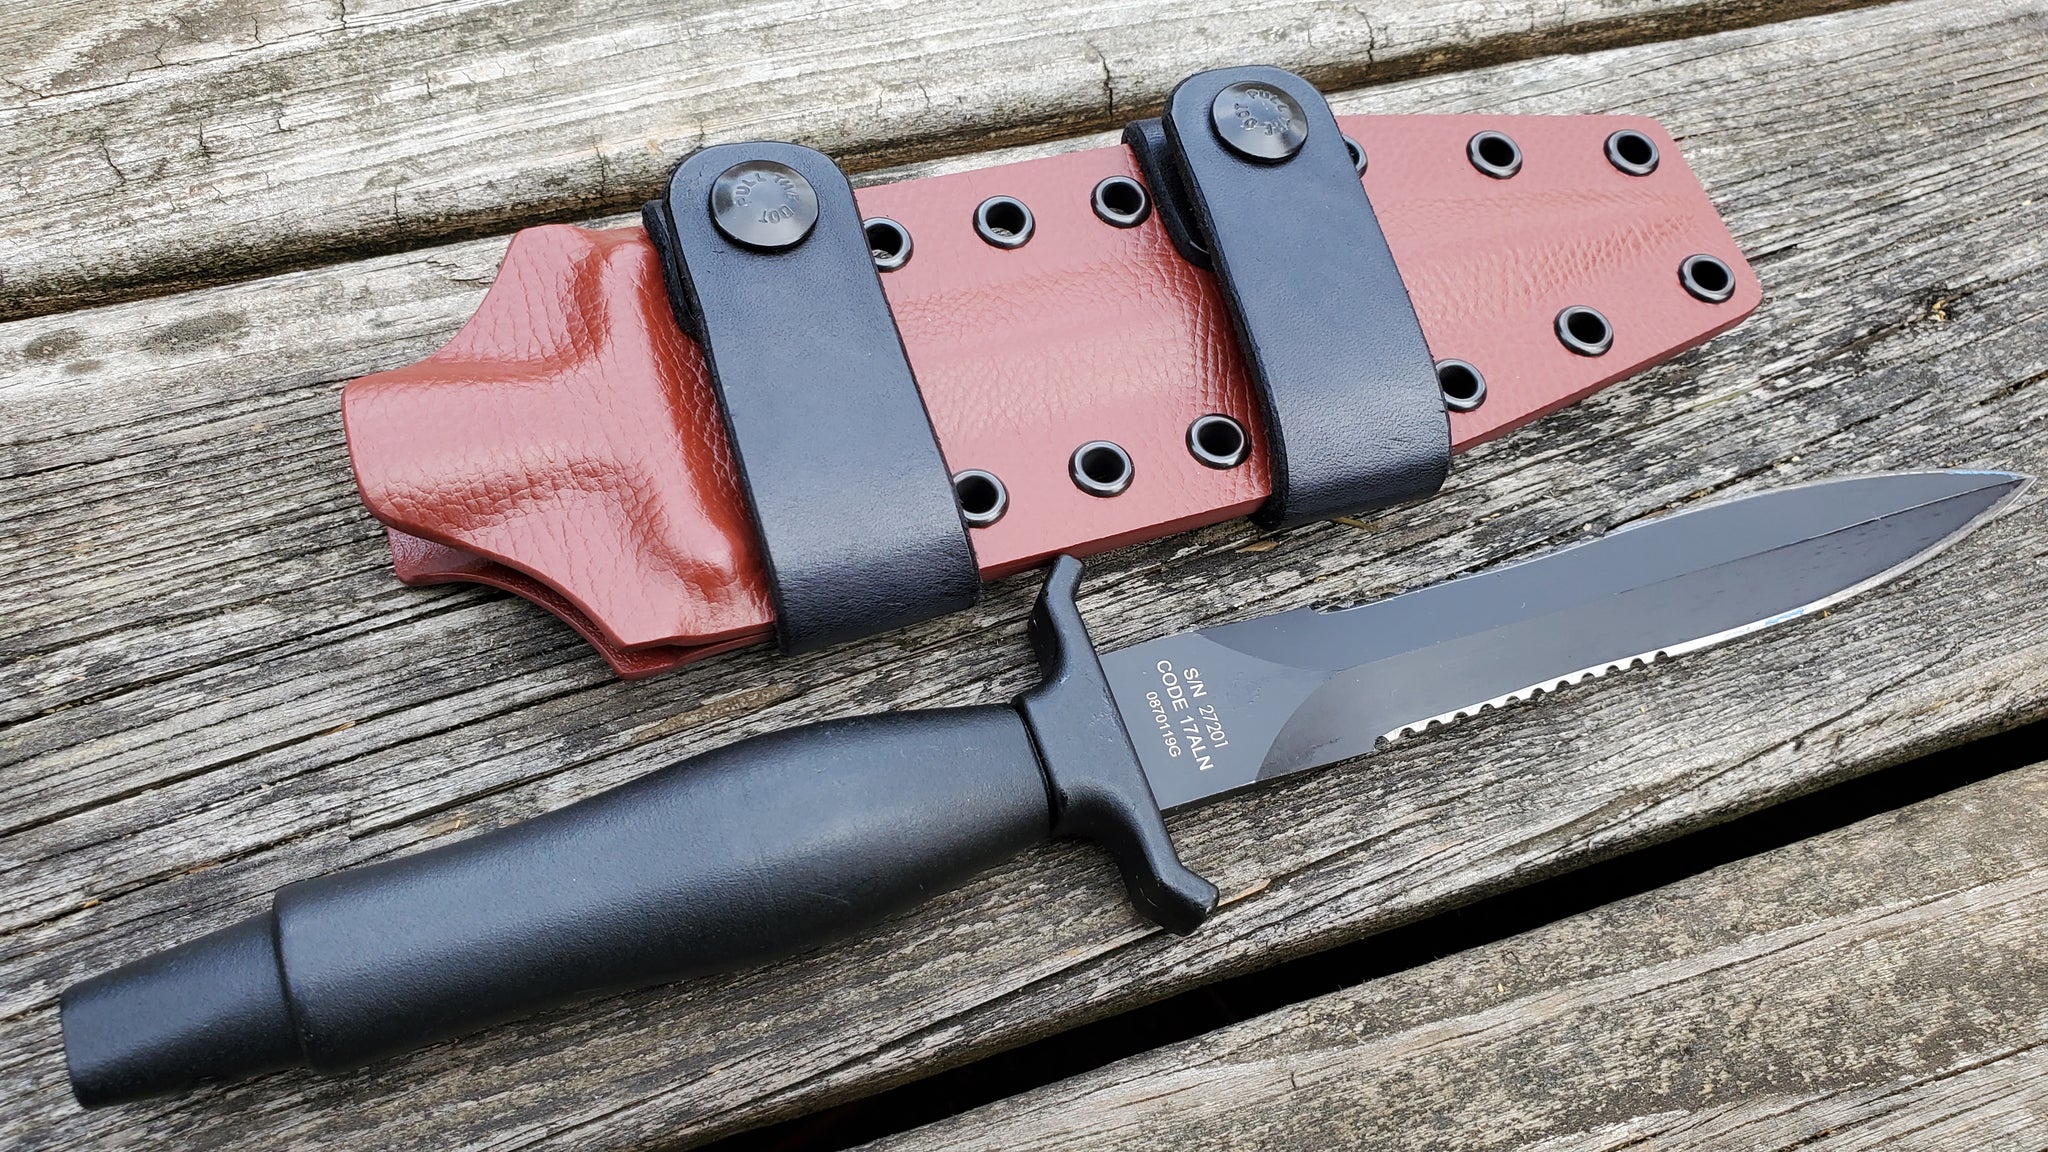 Gerber " MARK II " Kydex sheath, Scout Carry Leather Straps